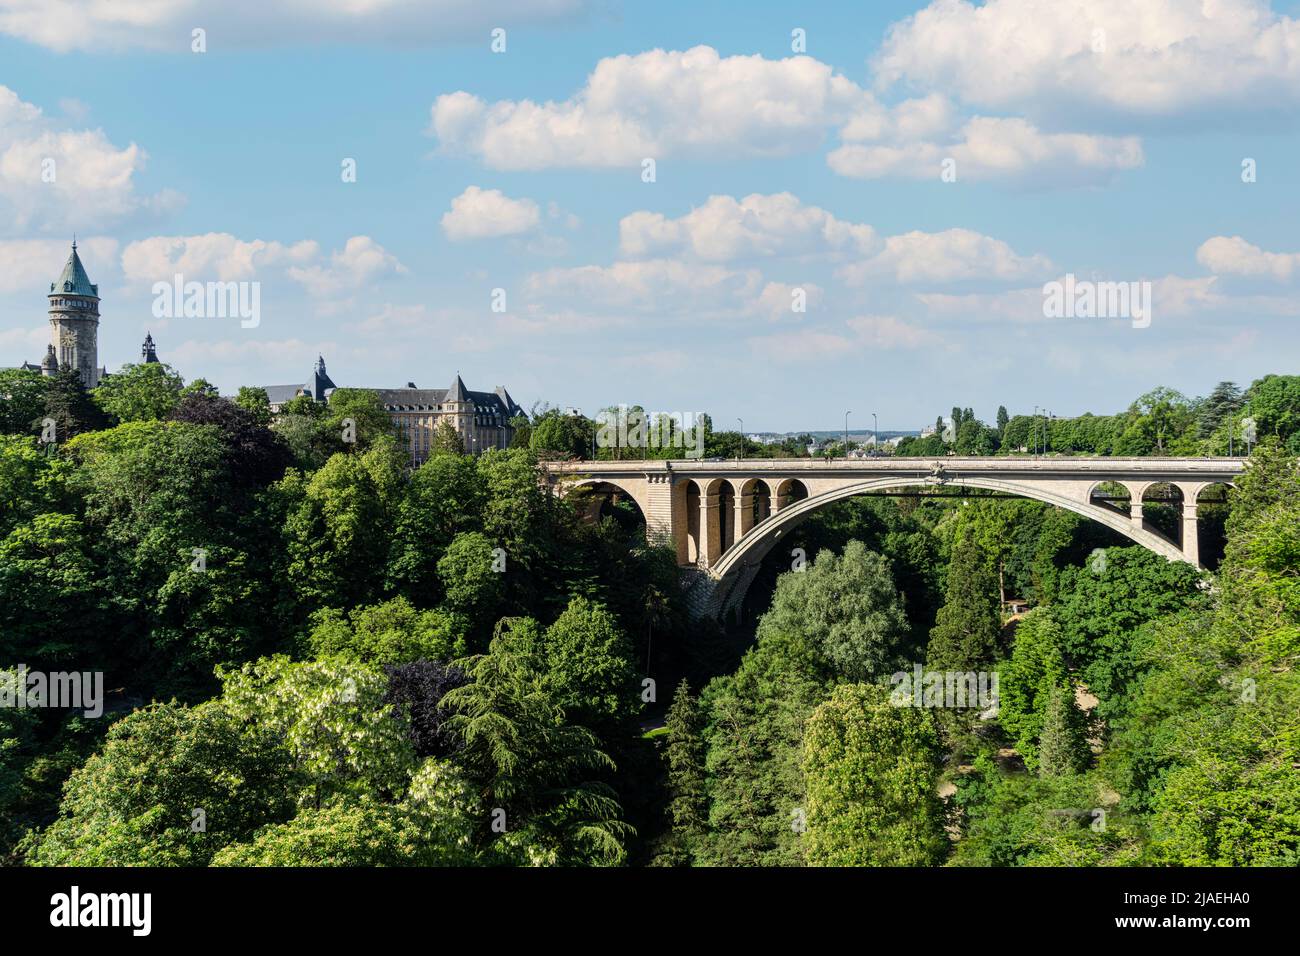 Luxembourg city, May 2022. Pont Adolphe. Stone bridge from the early 1900s with a picturesque view from above and a peaceful park at its foot. Stock Photo